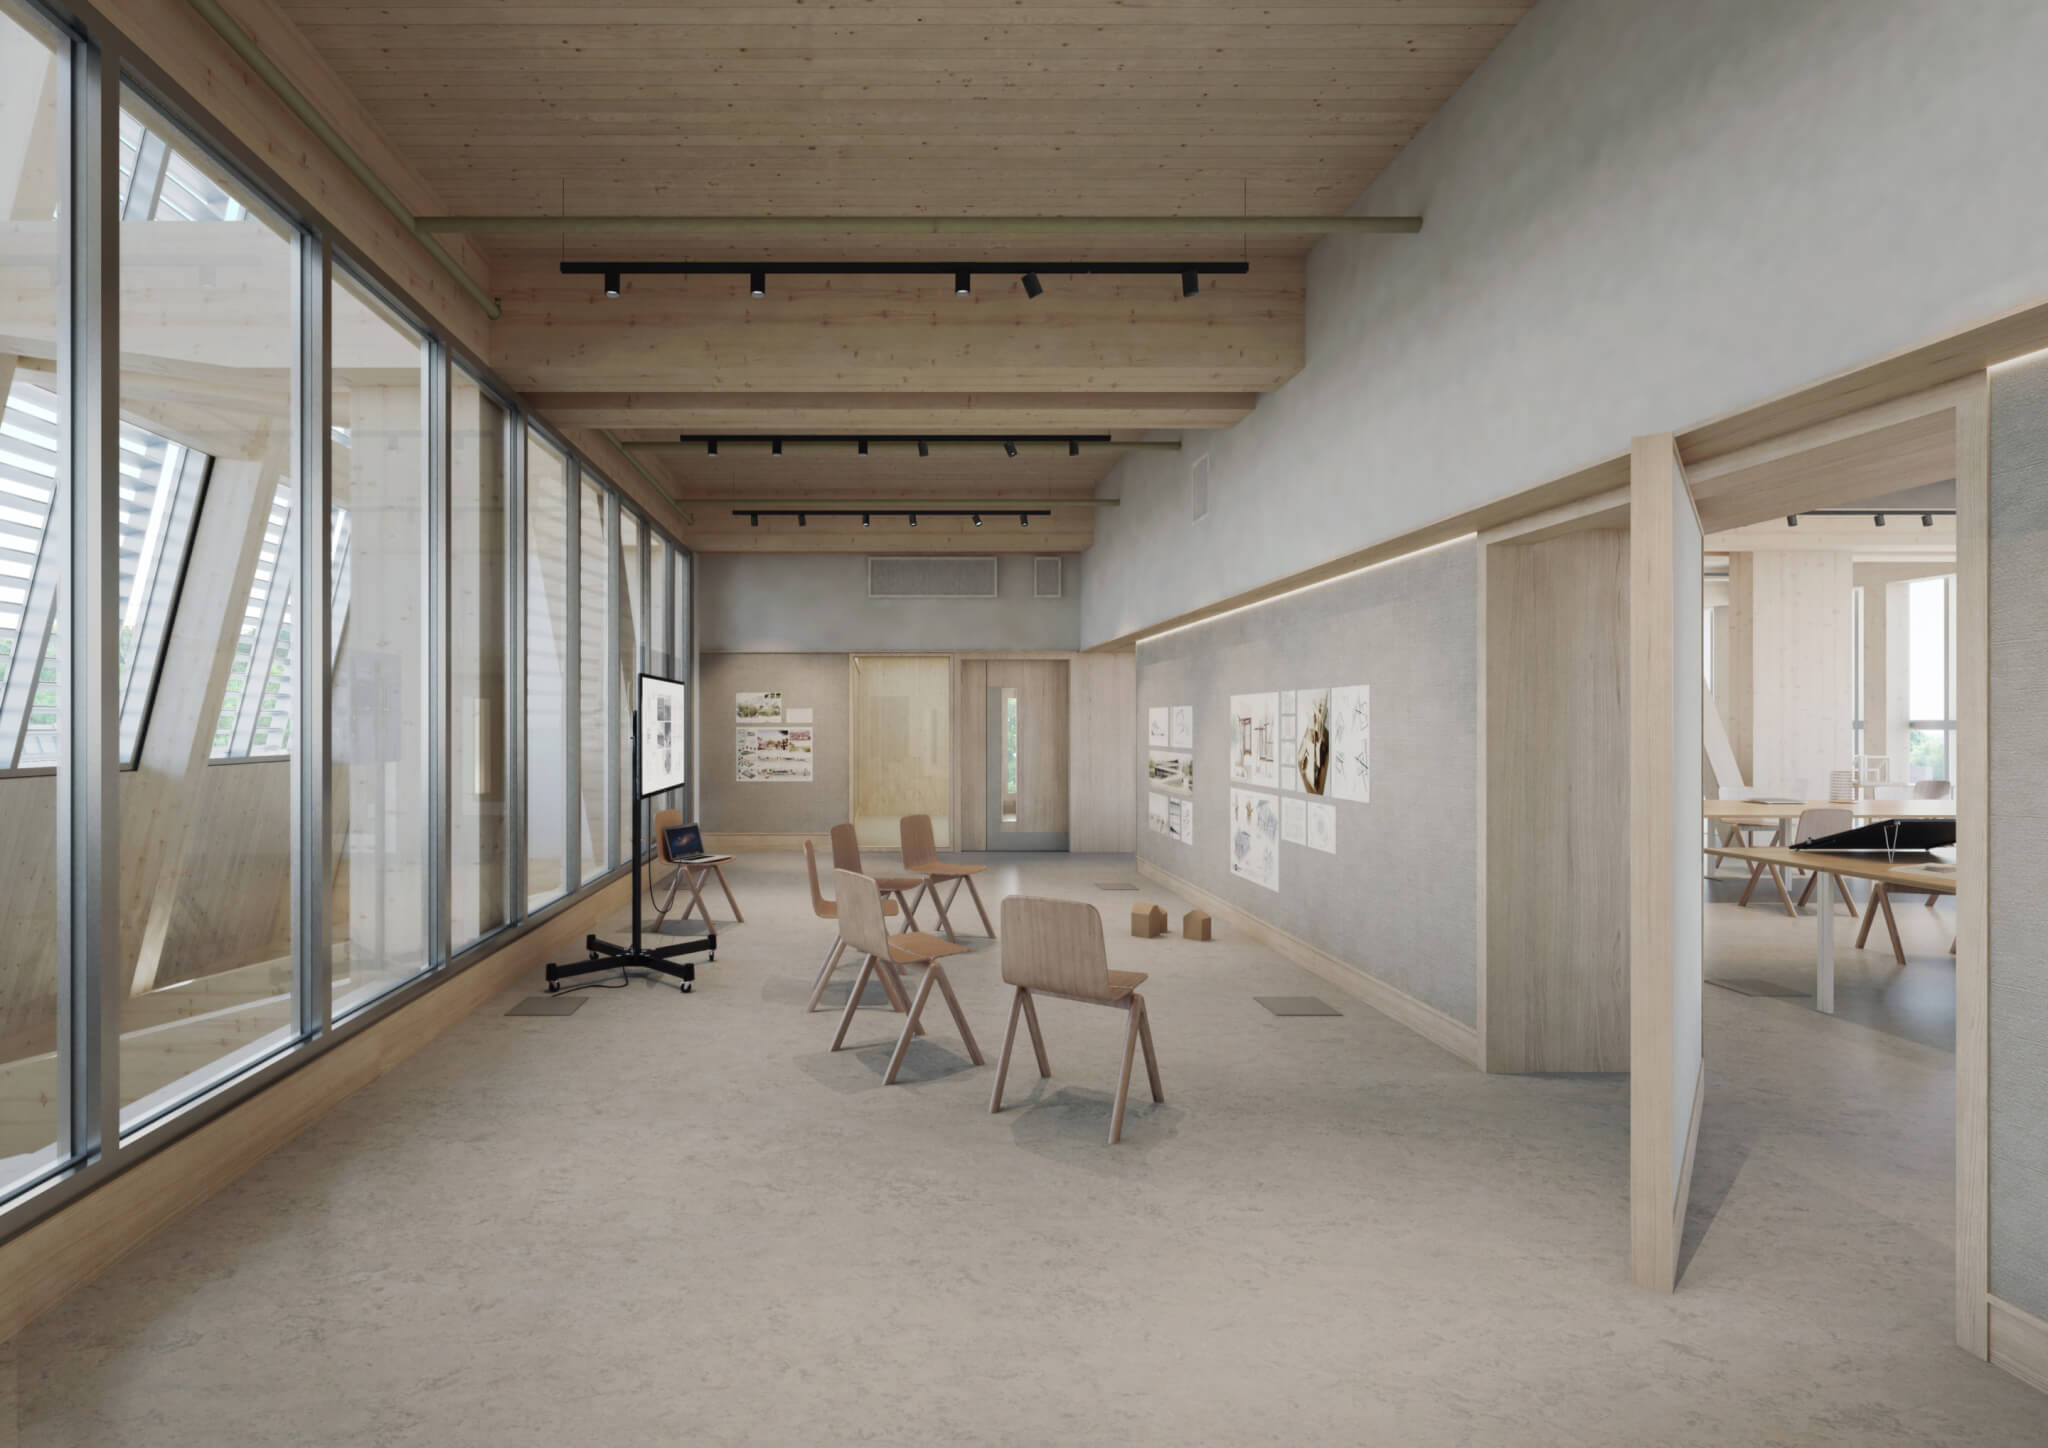 Interior rendering of a mass timber classroom space